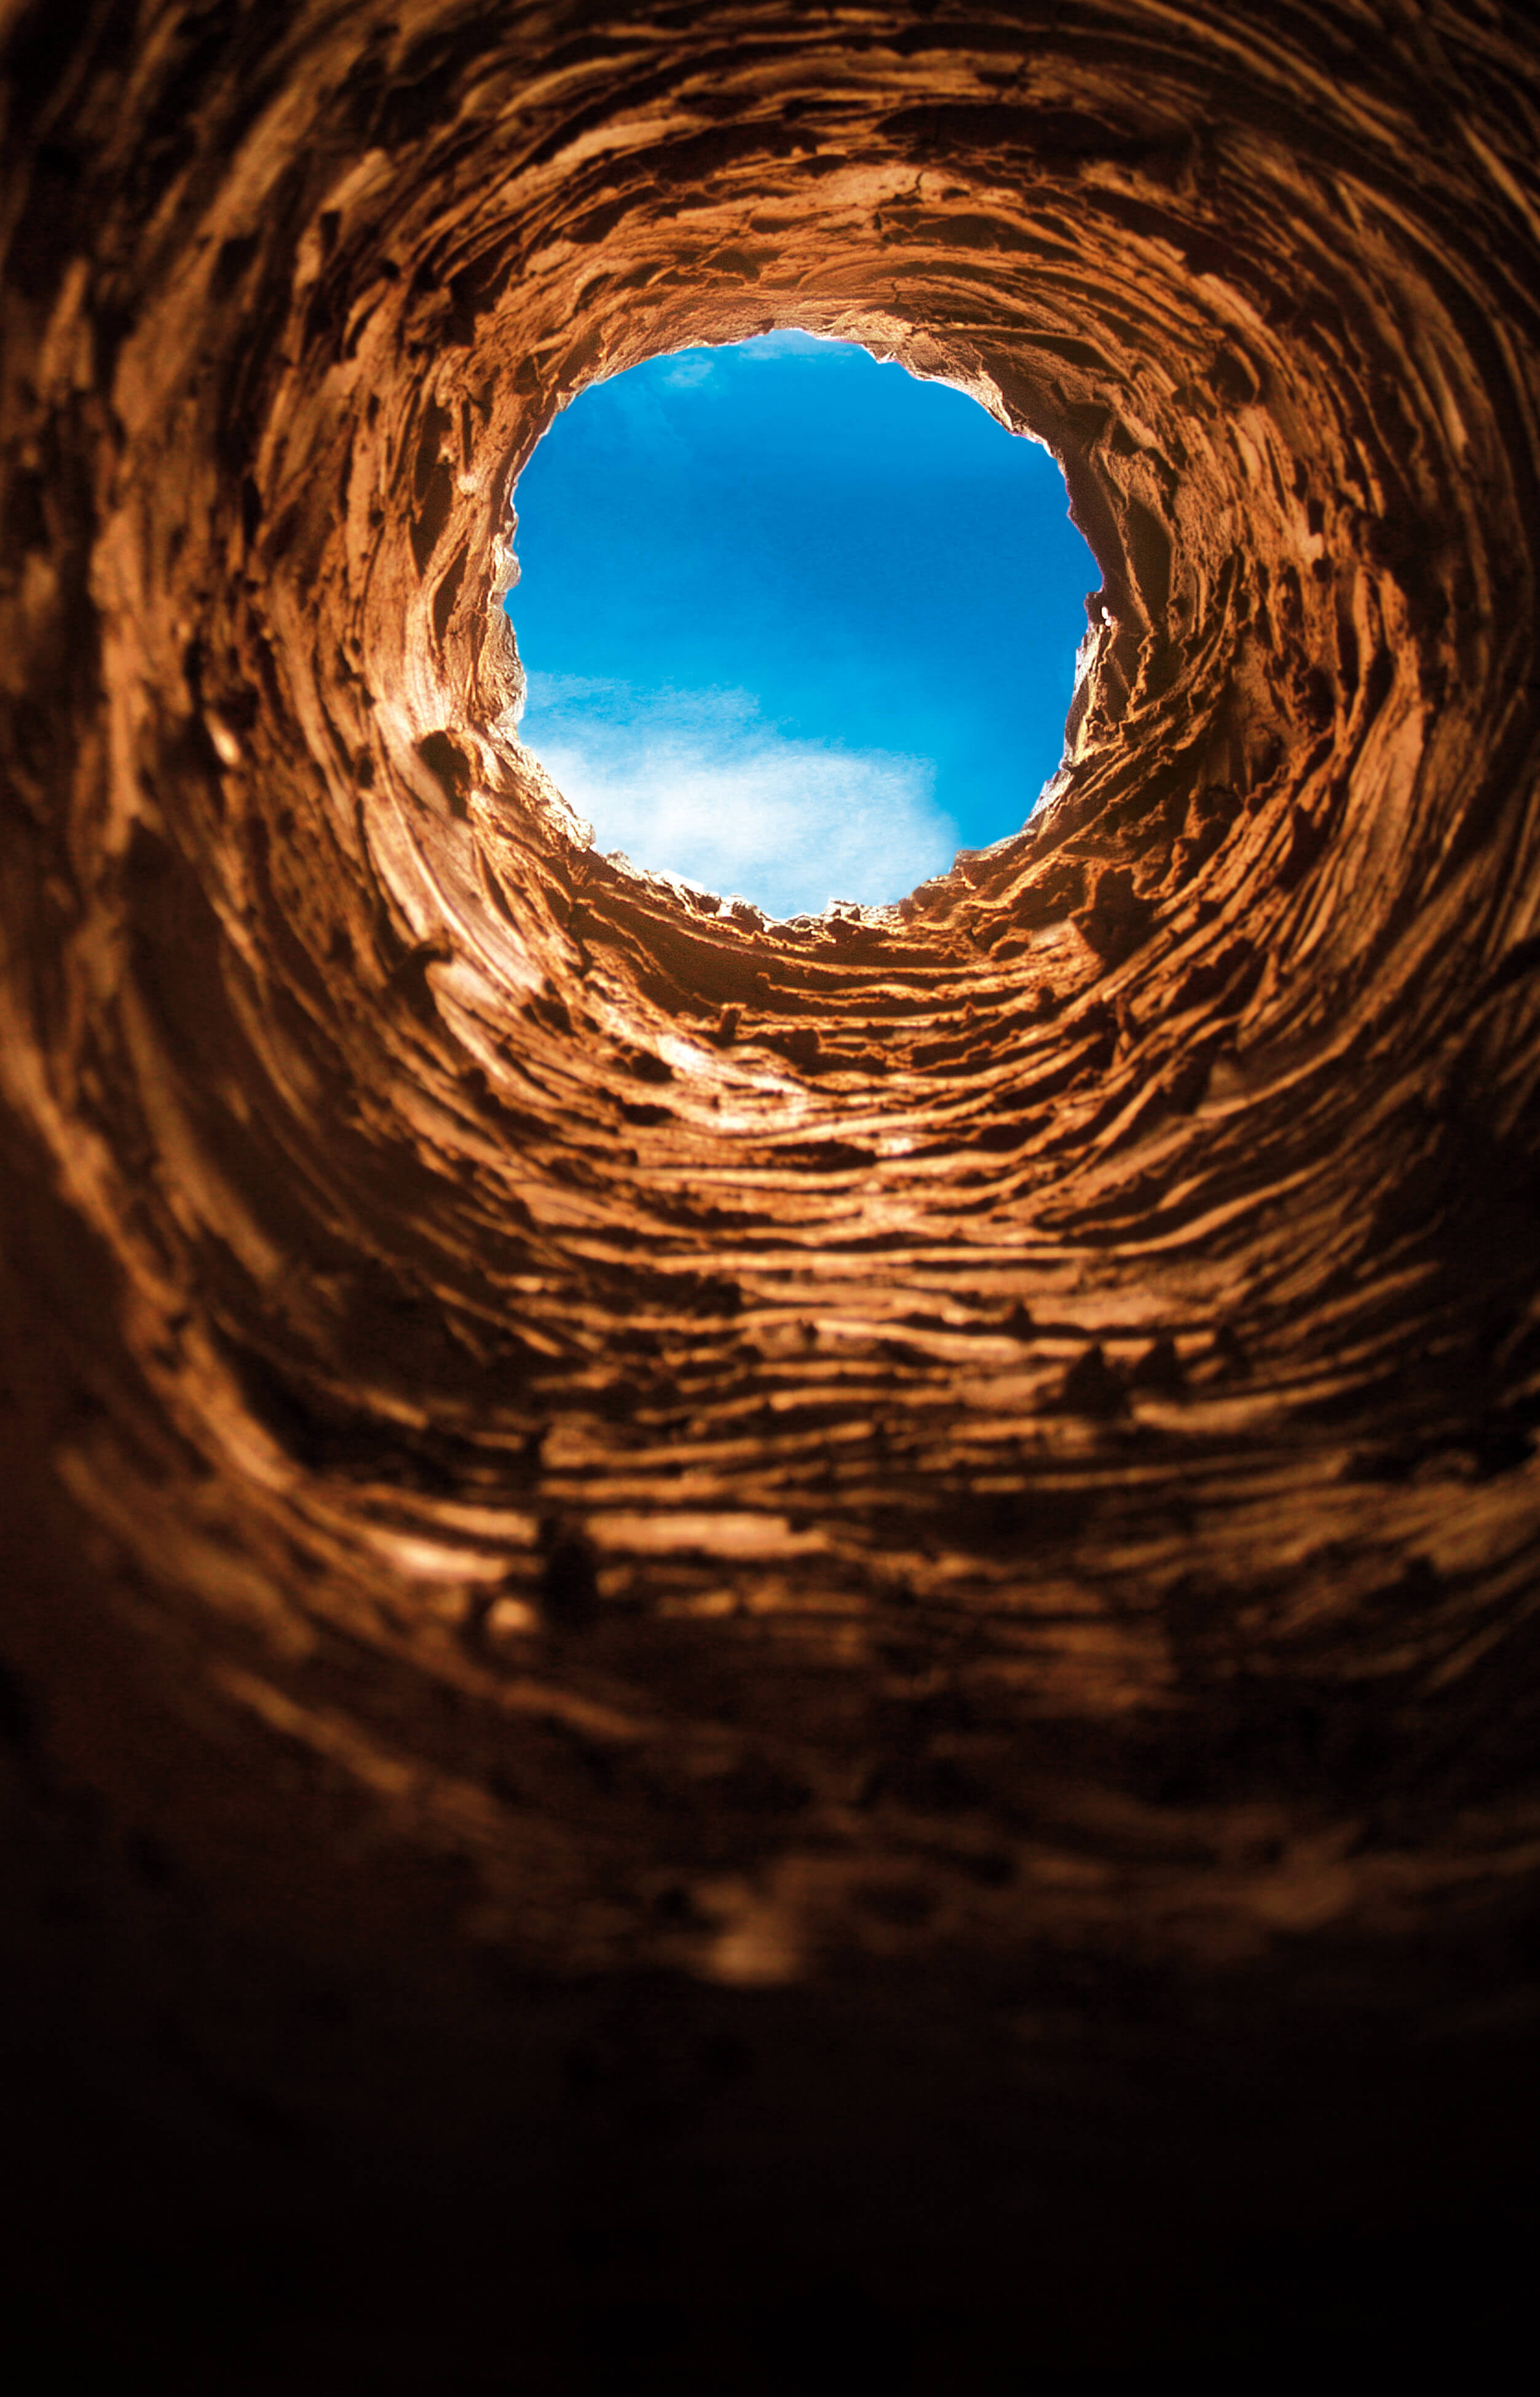 Guest Post] Avoid the Rabbit Hole! When to Stop Searching | DonorSearch